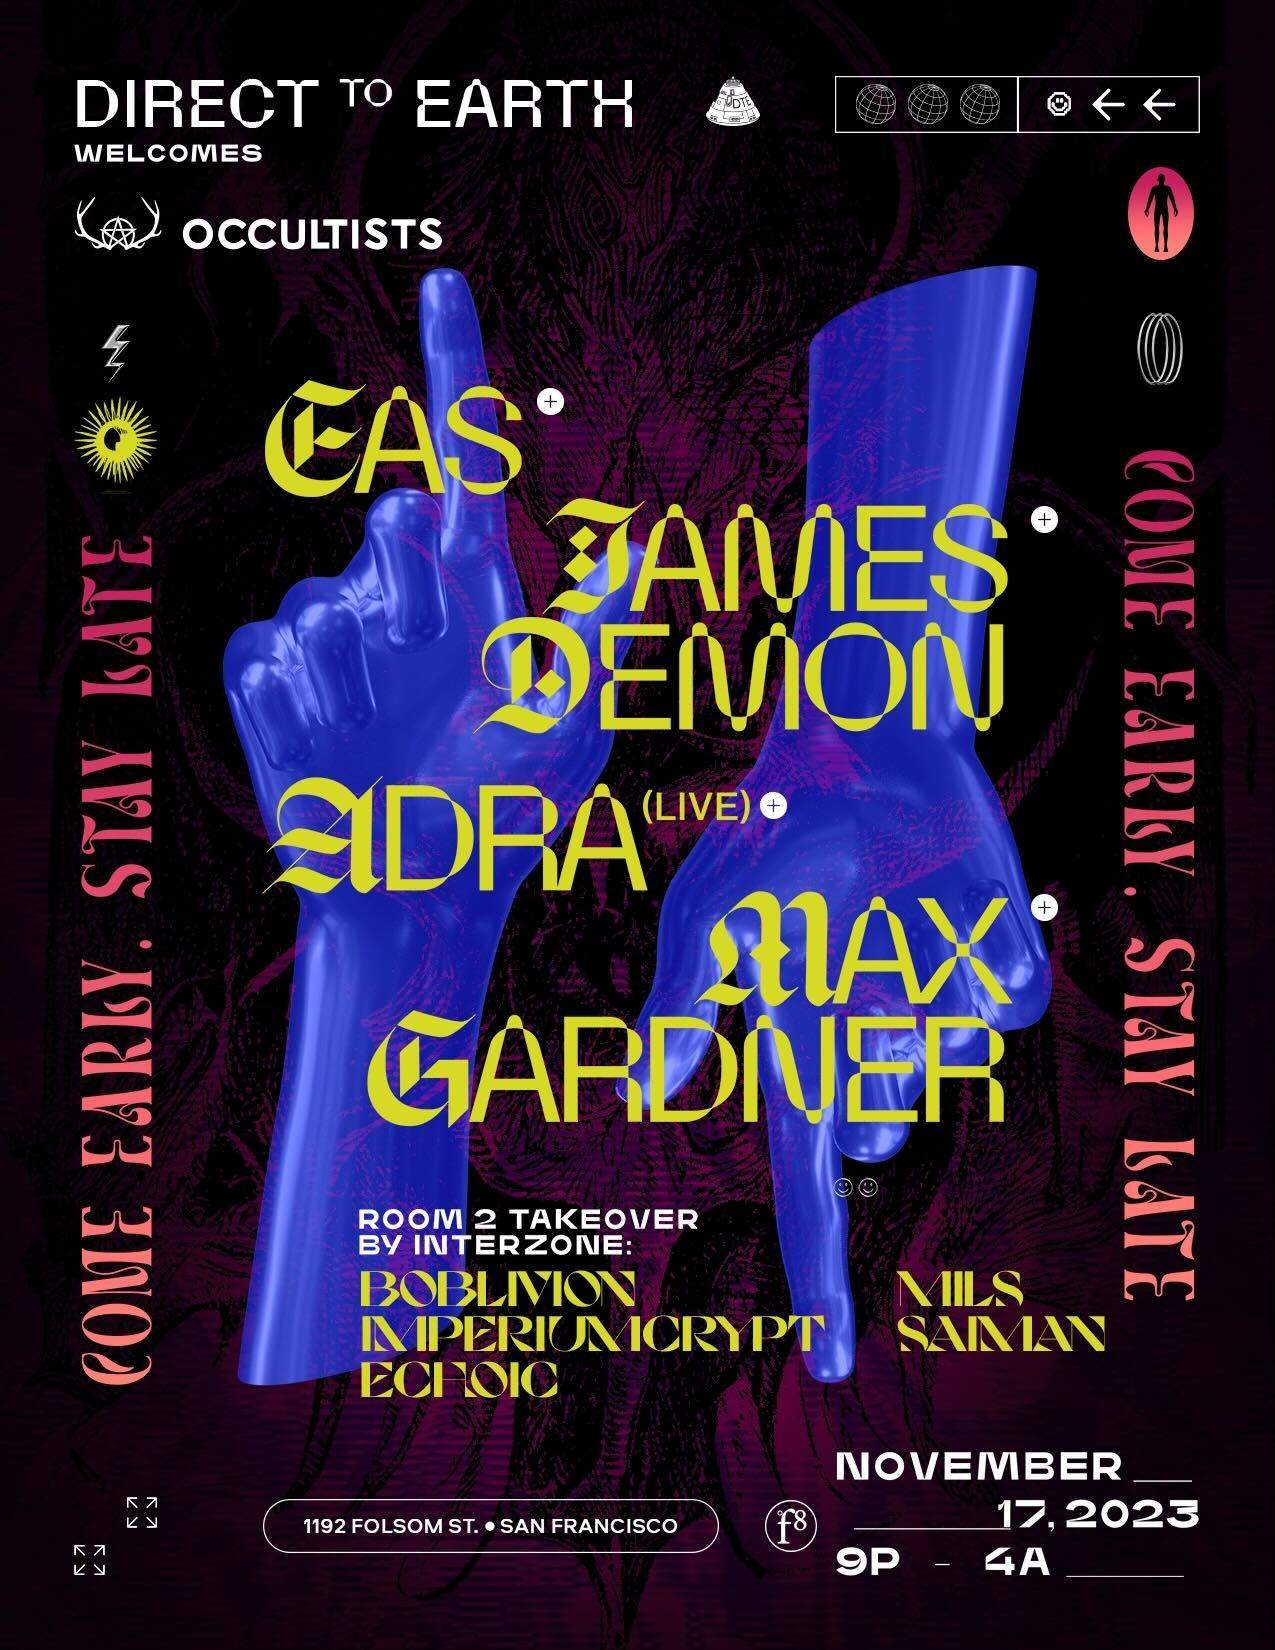 Direct to Earth welcome Occultists with EAS, James Demon, Interzone, Adra (live) & Max Gardner - Página frontal